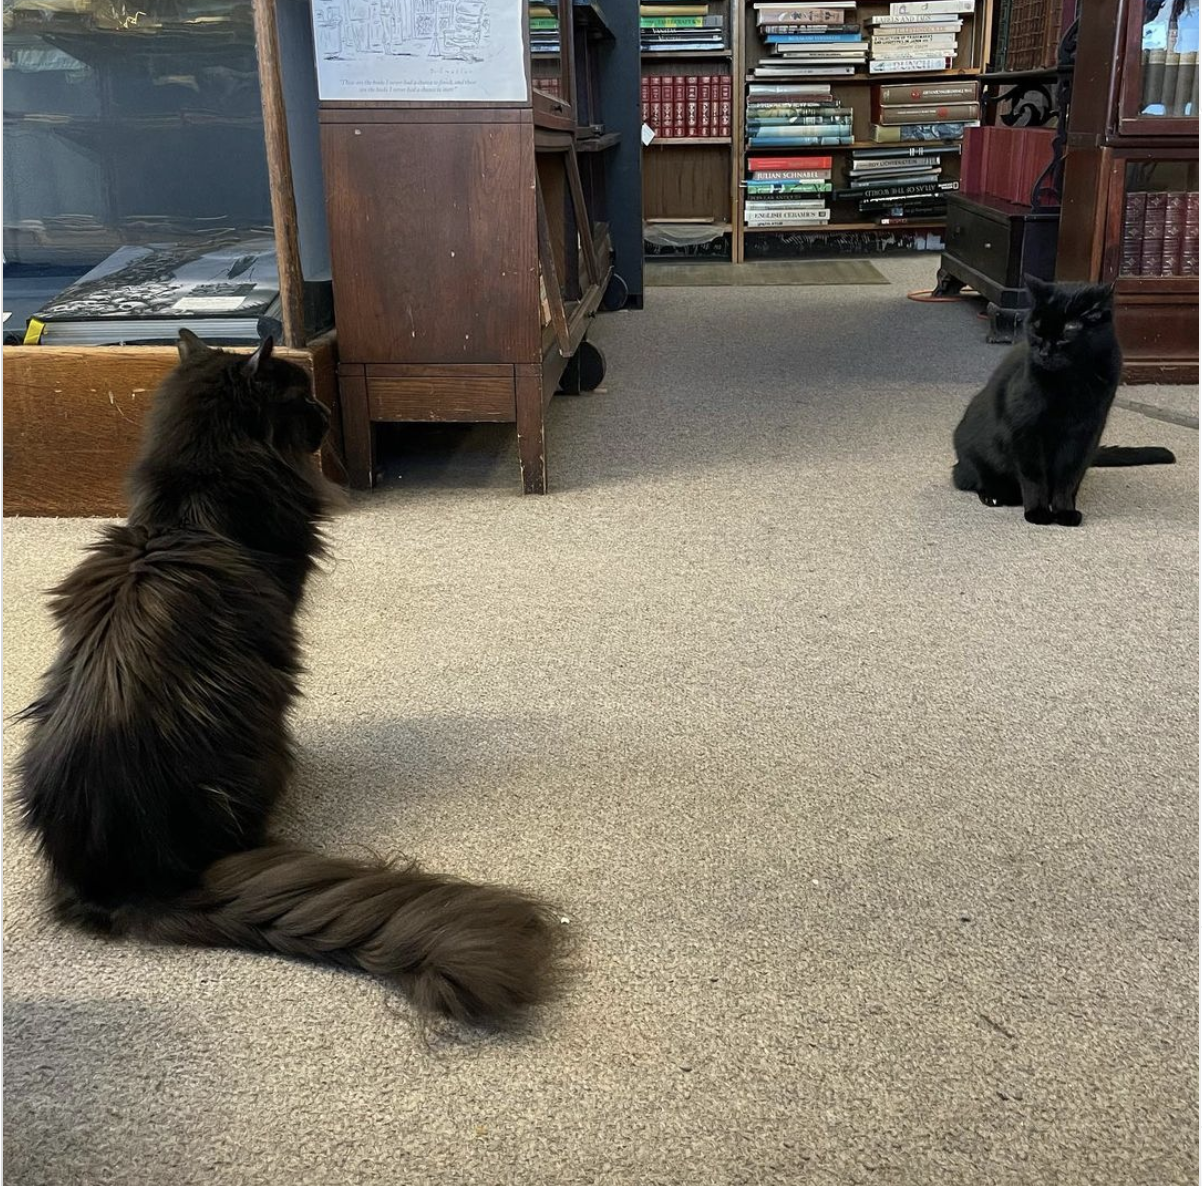 Two black cats sit several feet apart, looking at each other.